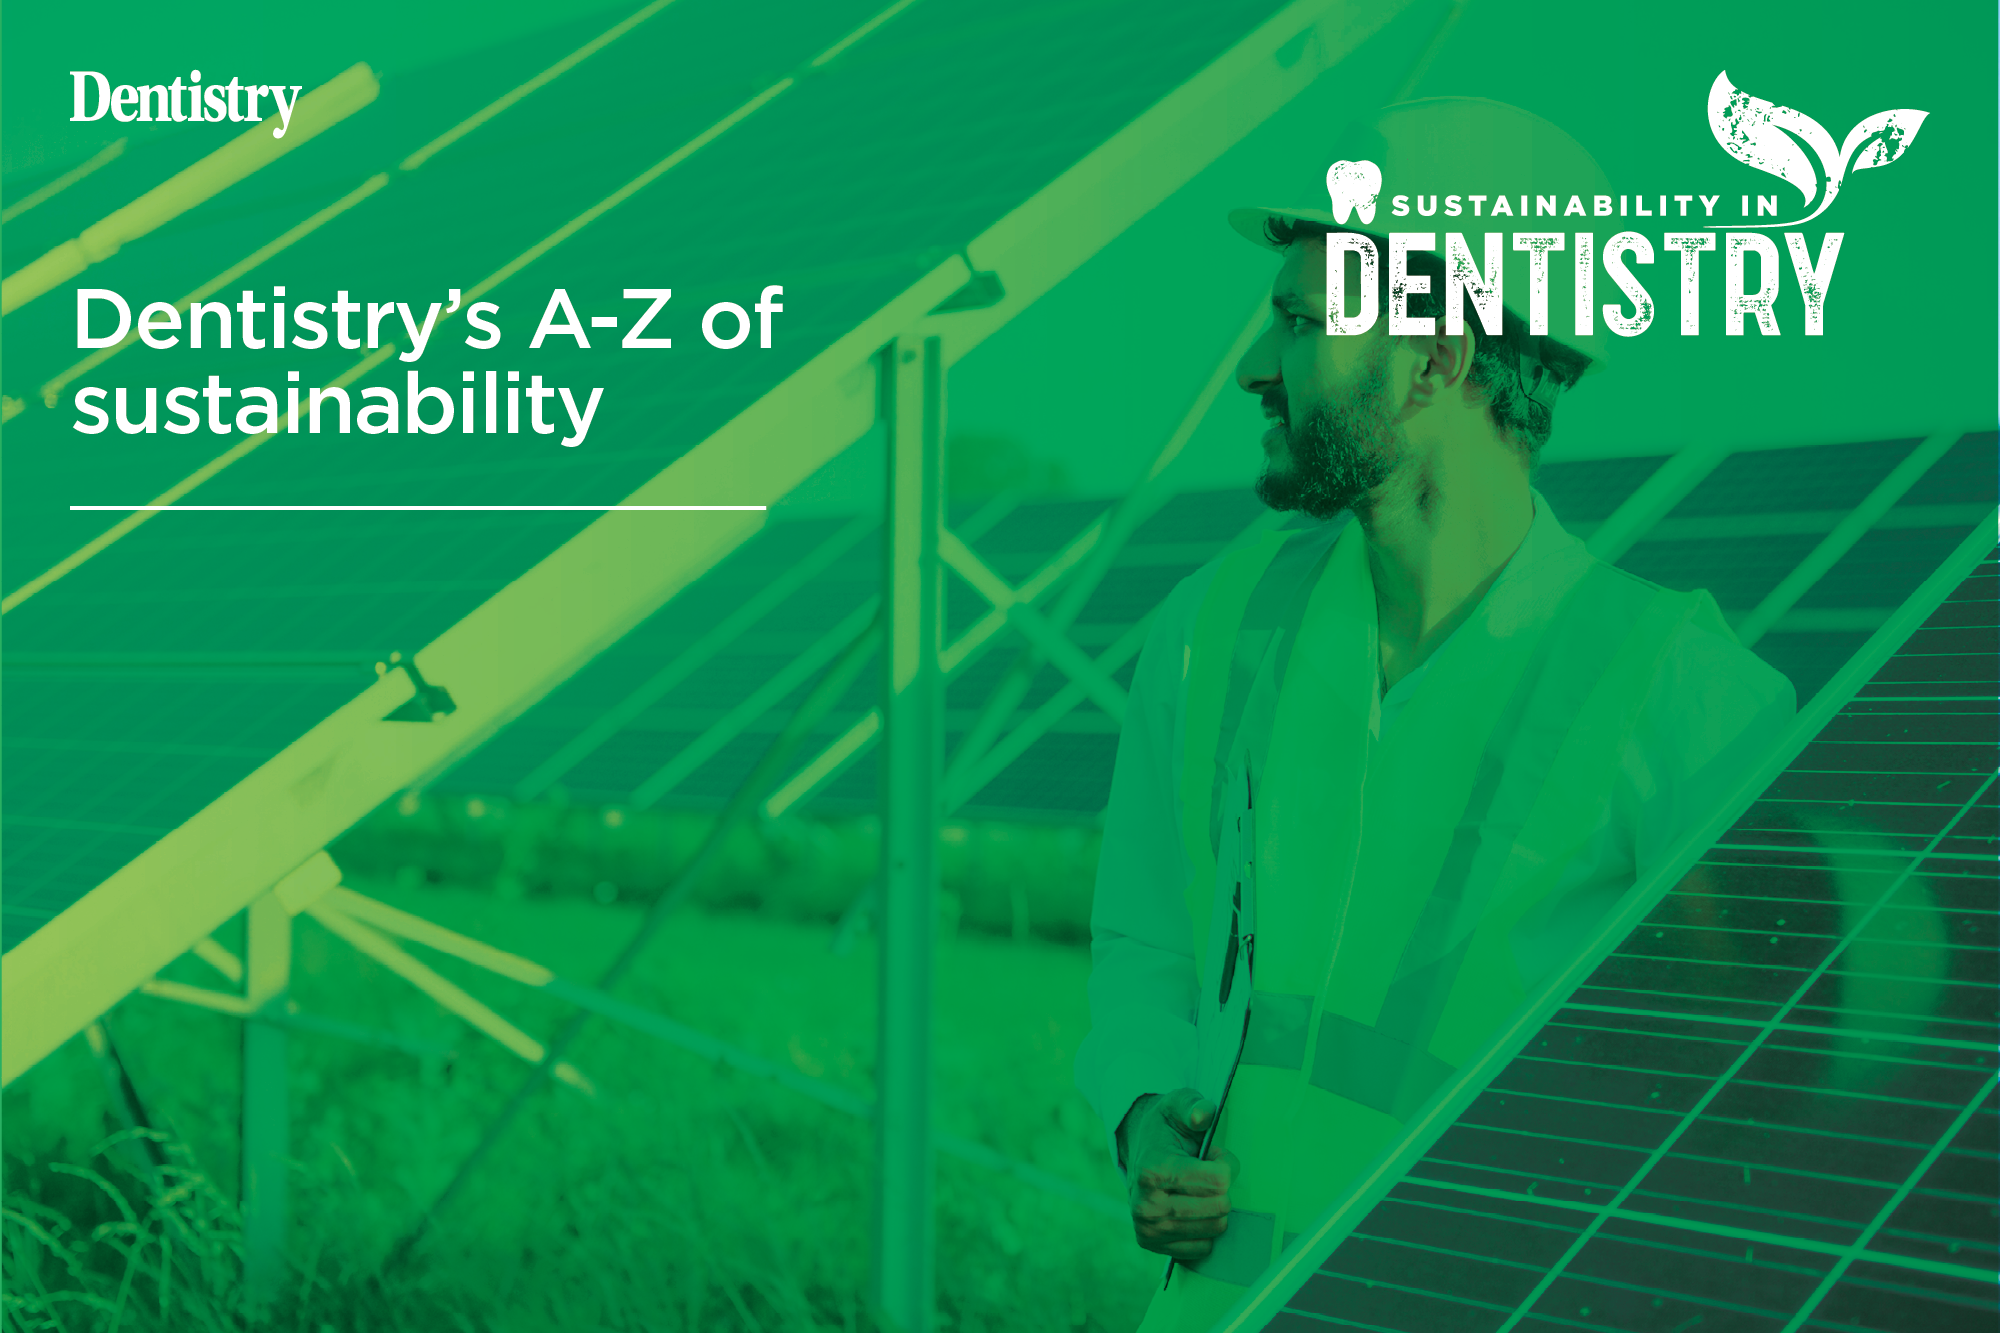 Dentistry's A-Z of sustainability